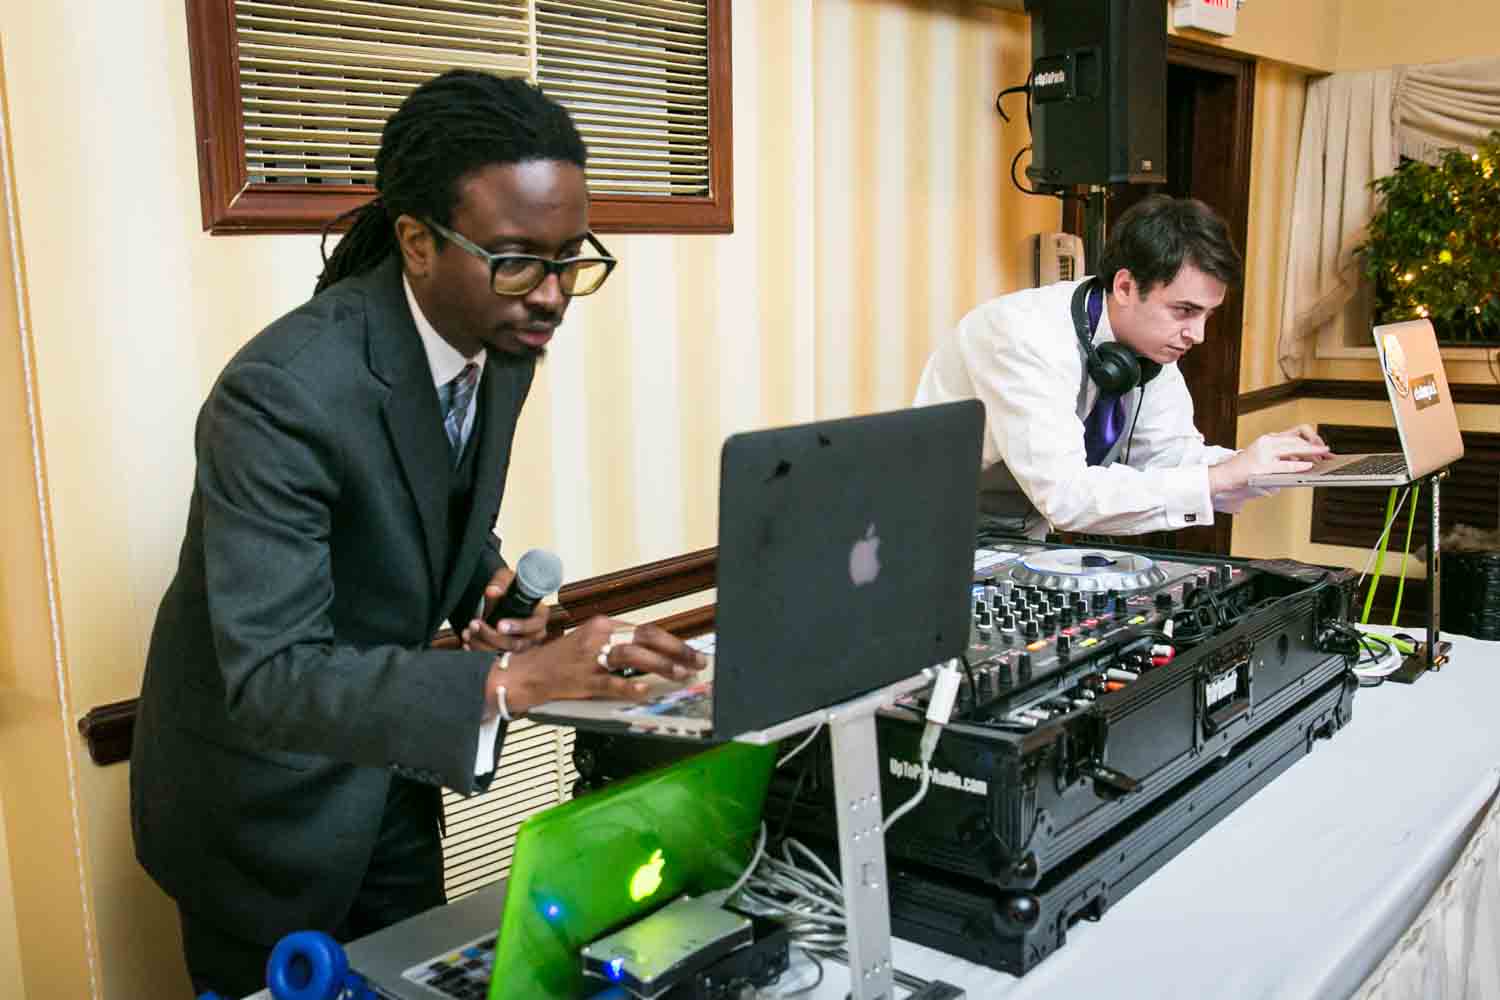 DJ and bride's brother playing music